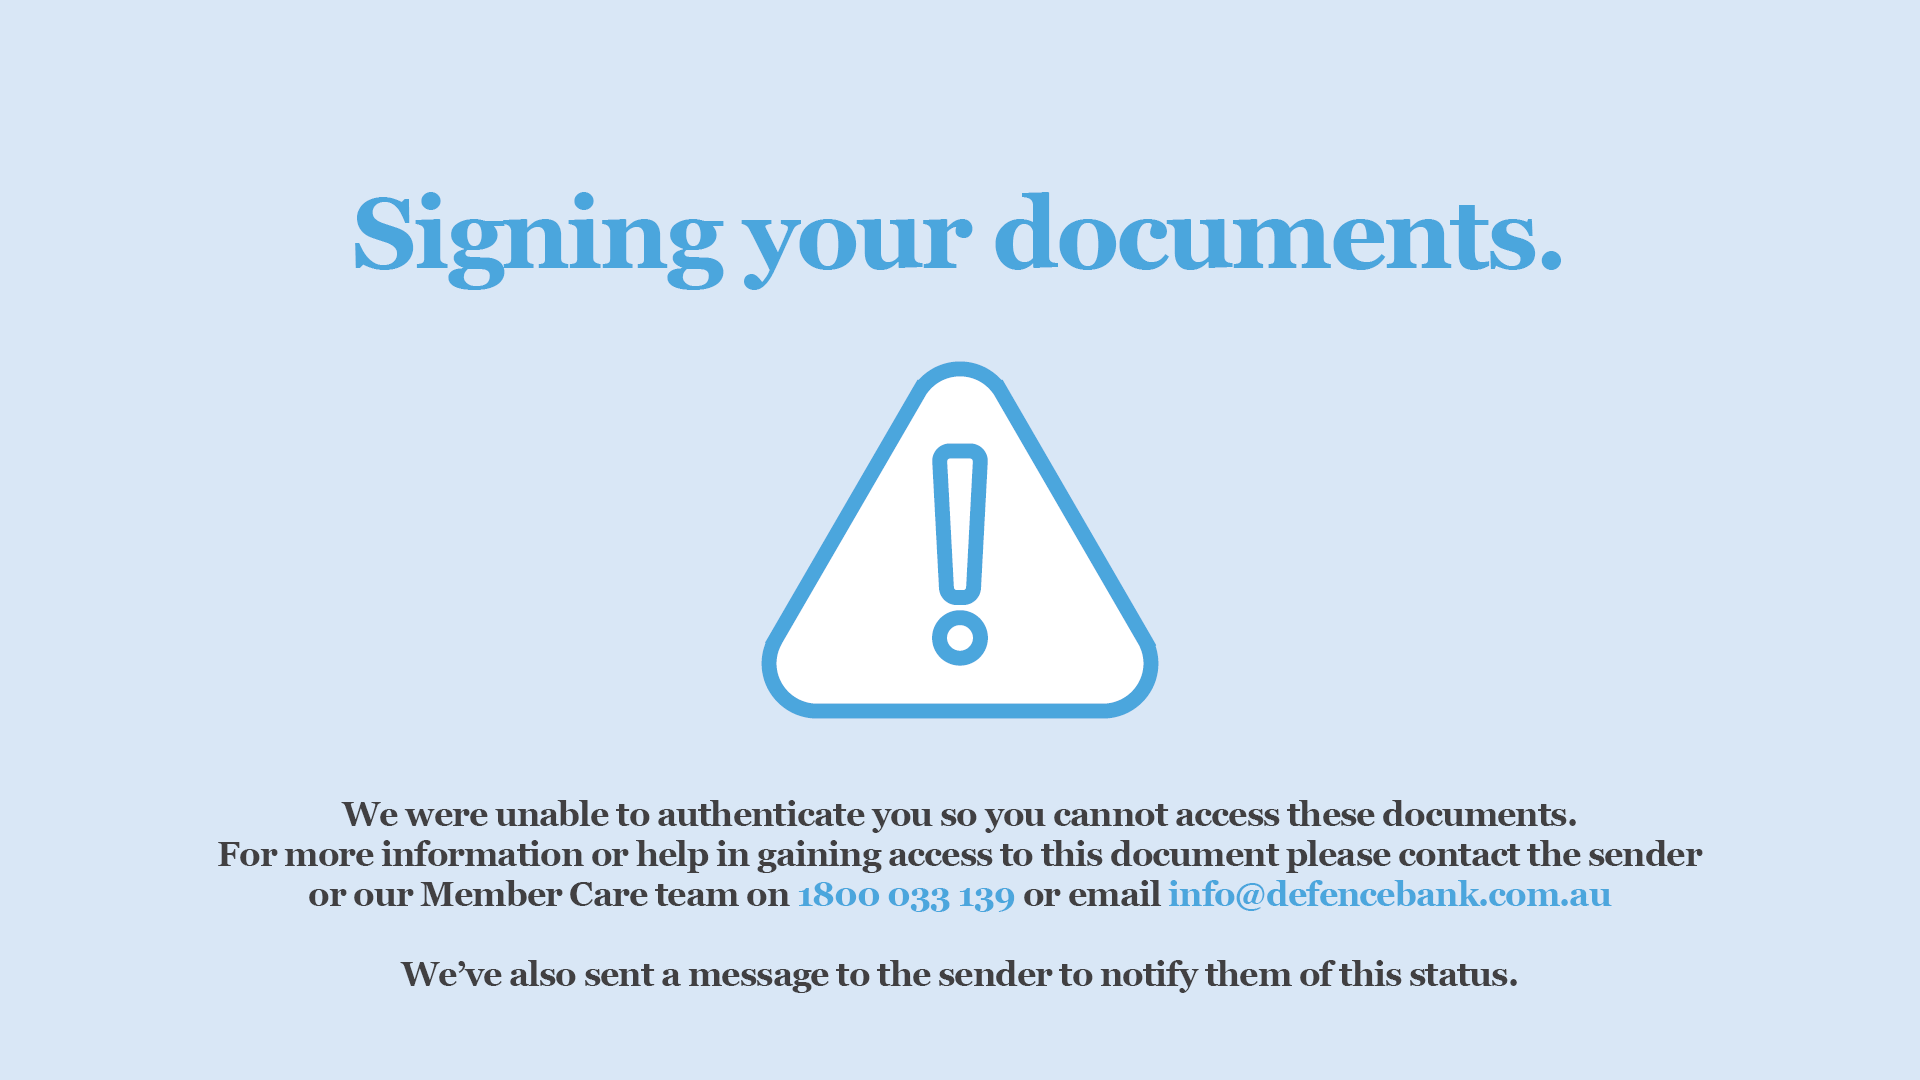 CAM00558_Docusign_ExitScreens_Jul2021_1920x1080px_Signing.png